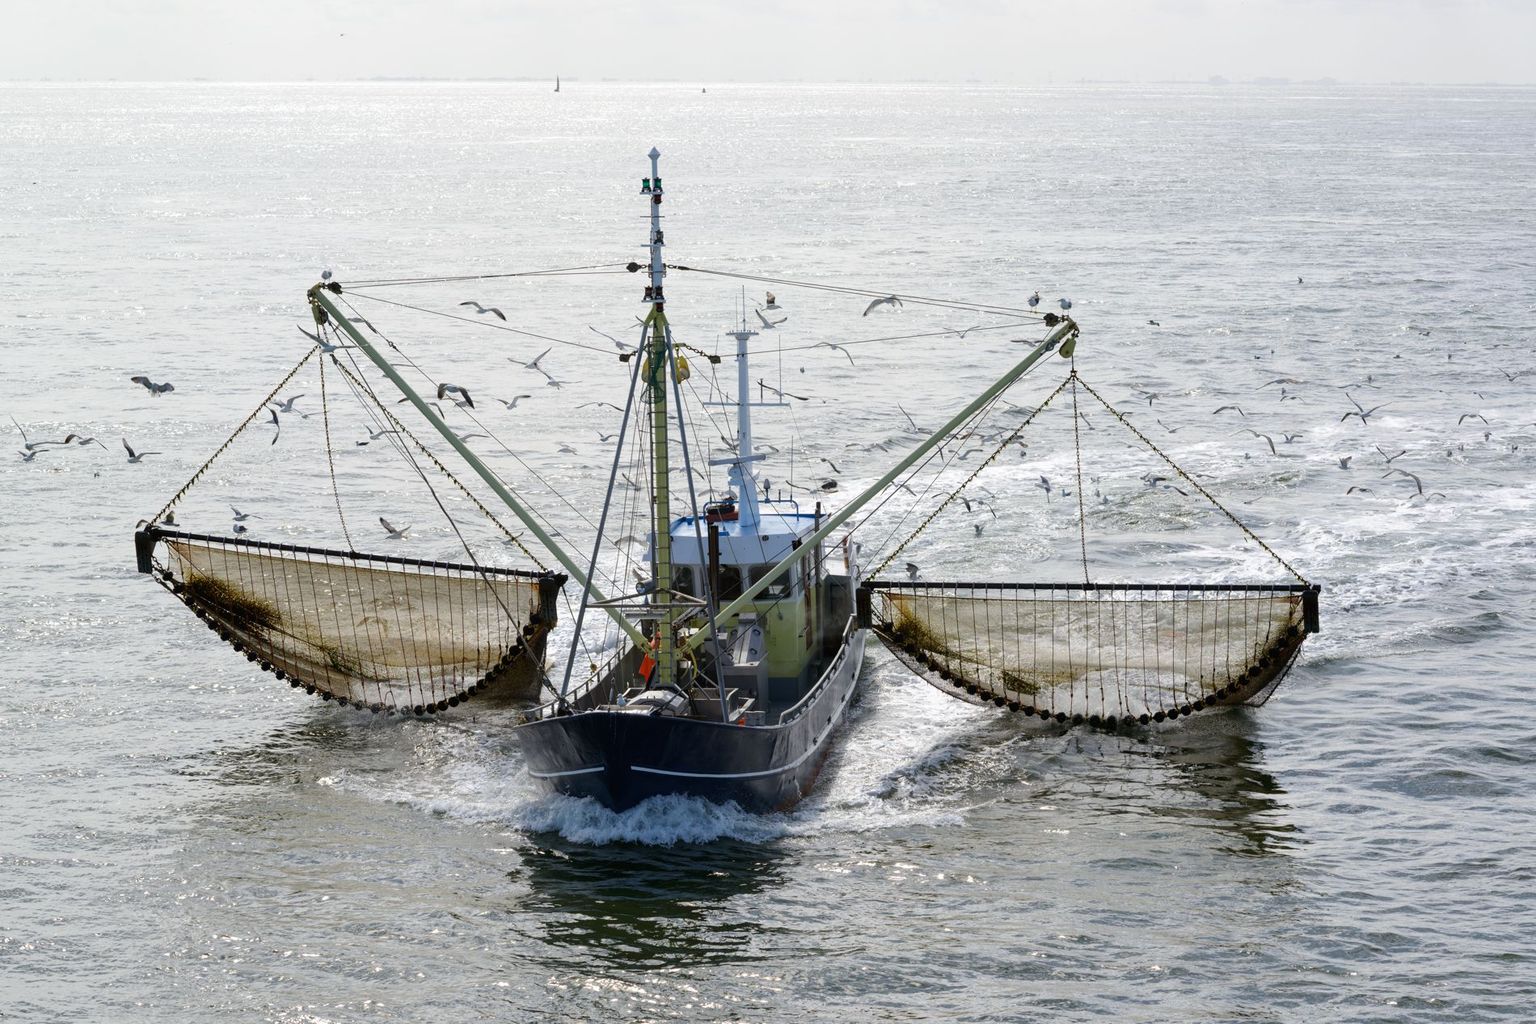 Fishing boat dragging a net through the waters of the Wadden Sea